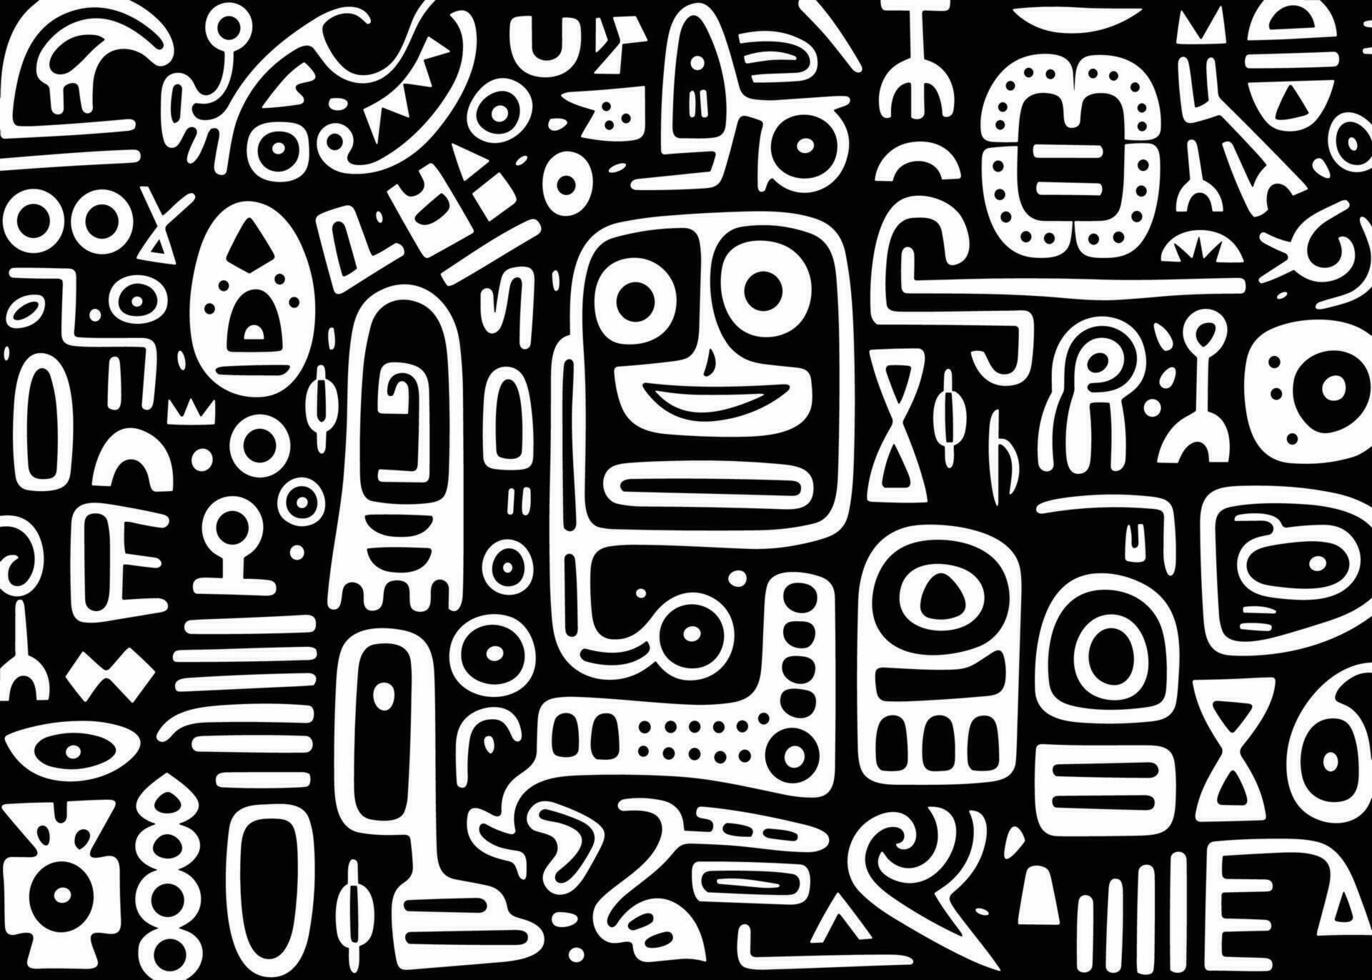 abstract pattern in black and white with various shapes and symbols, in the style of afro-colombian themes, freeform minimalism, texture-rich, expansive vector